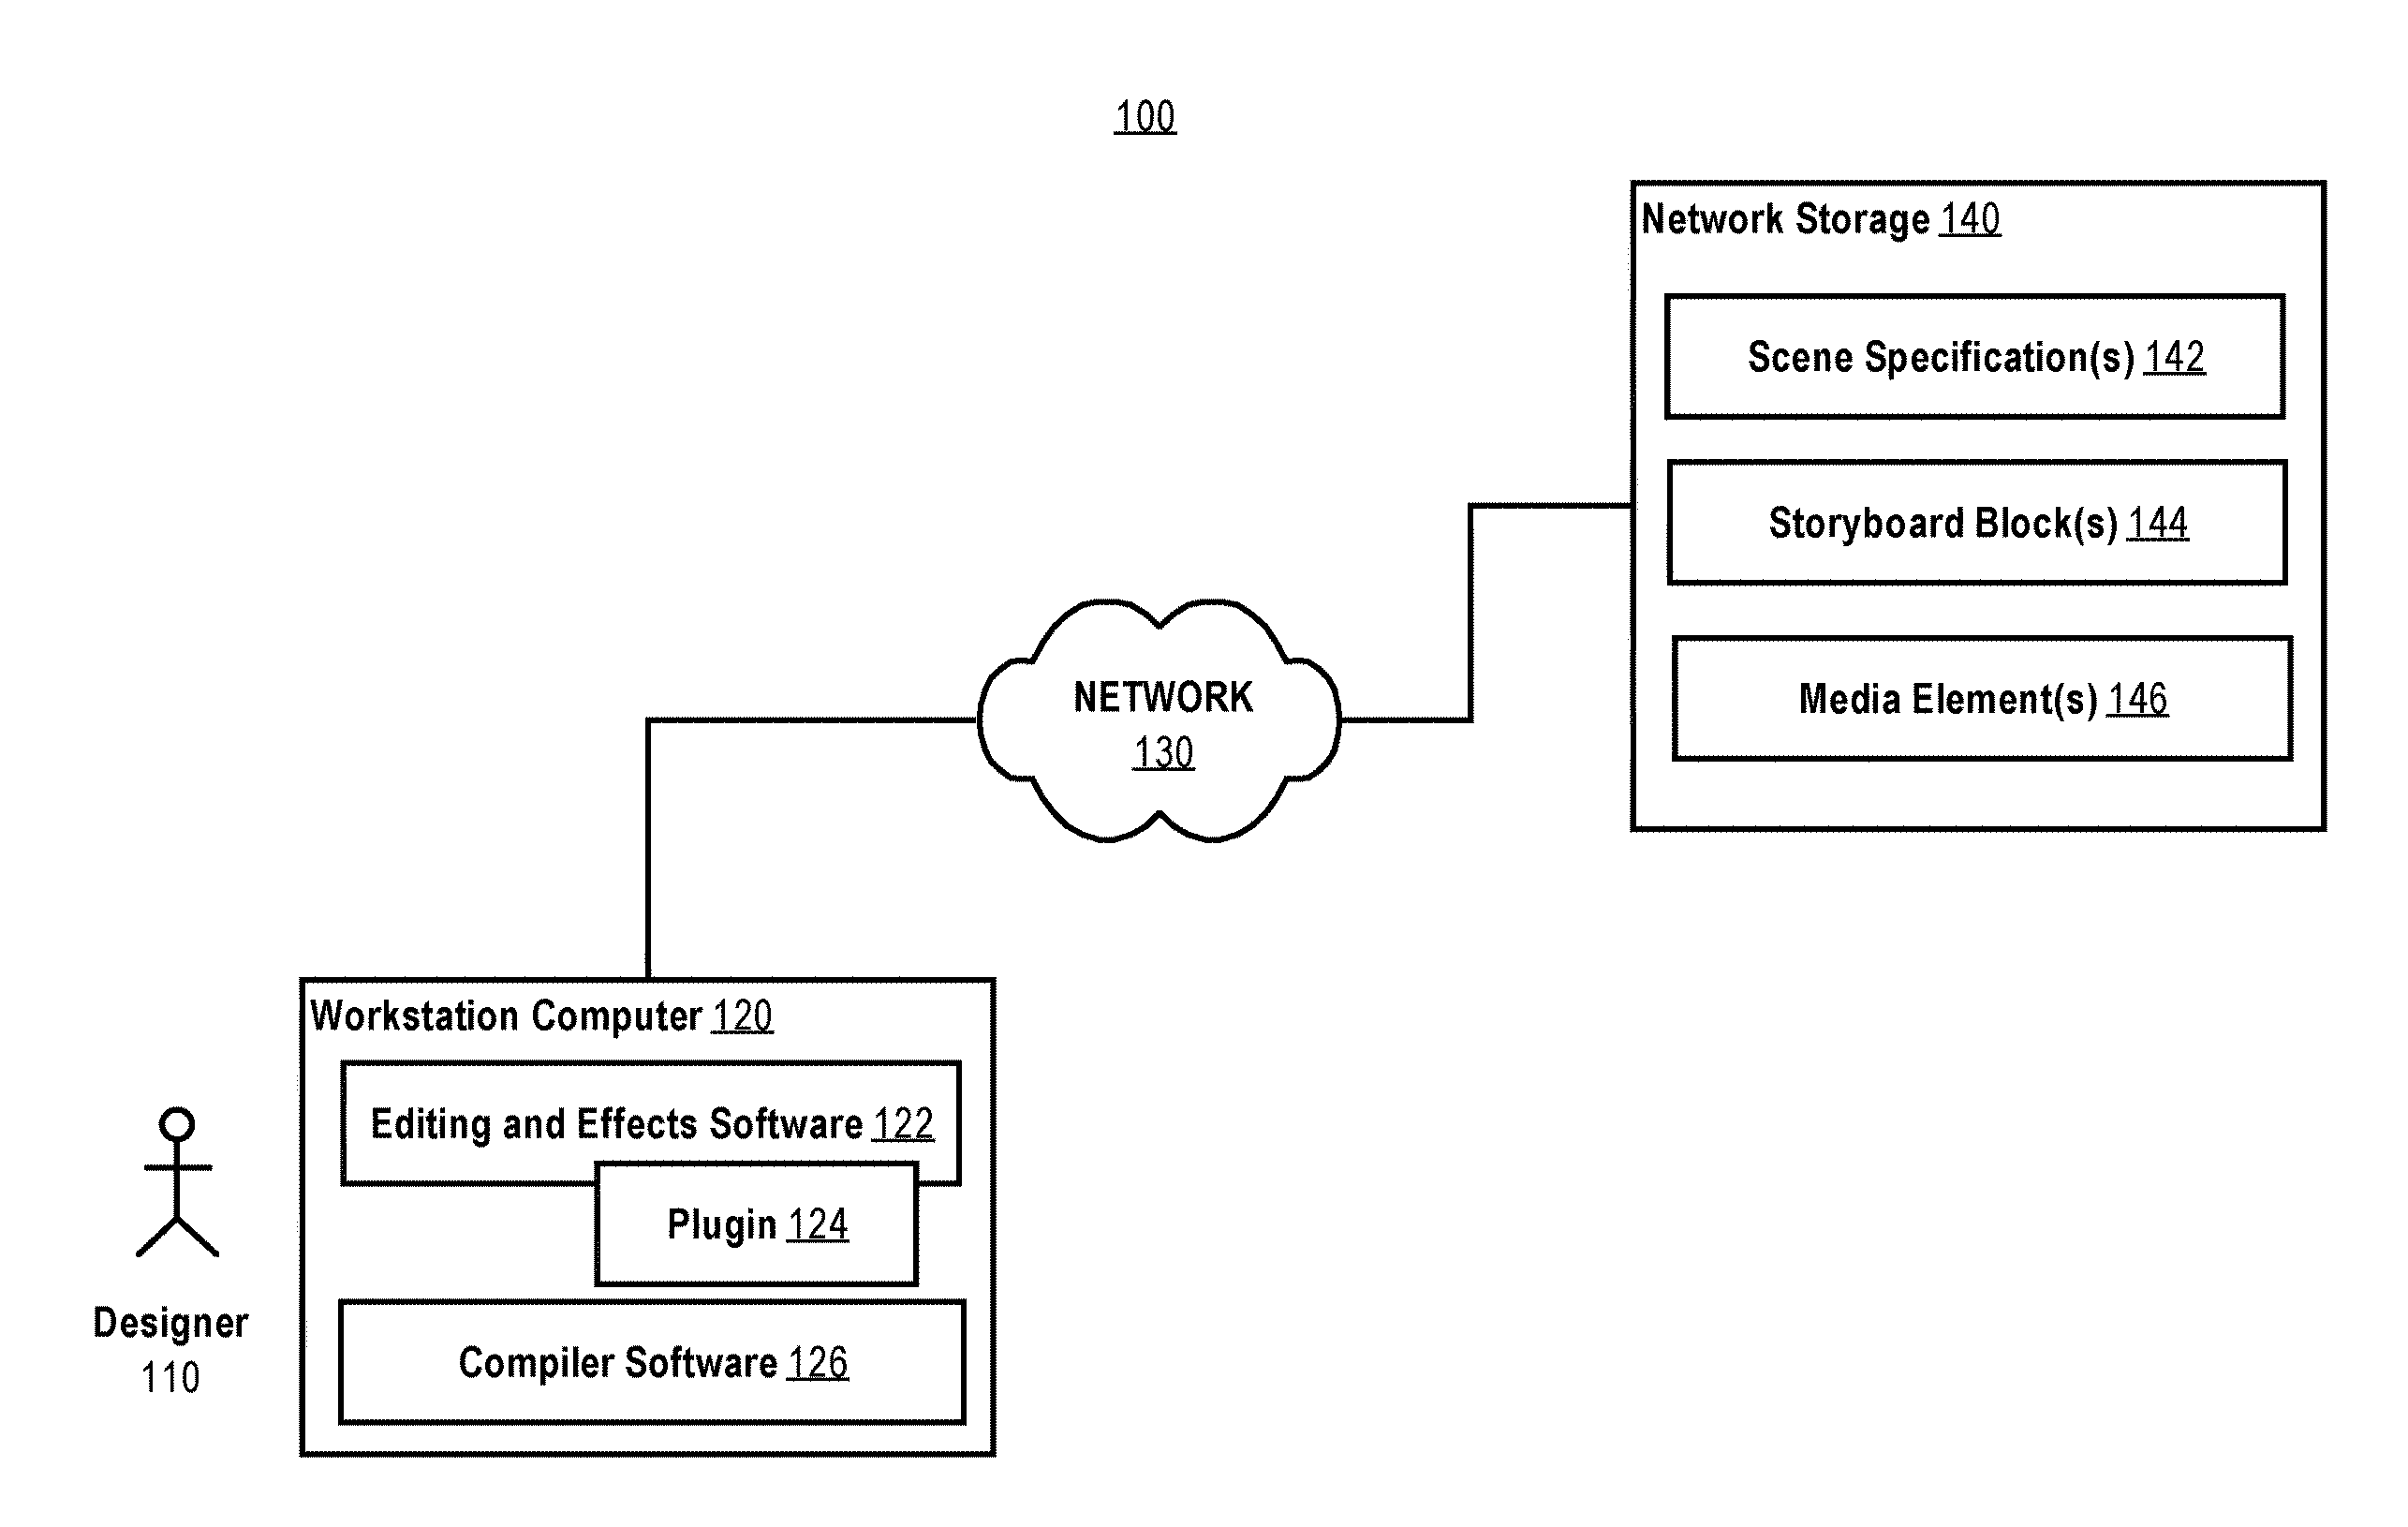 Digital video builder system with designer-controlled user interaction